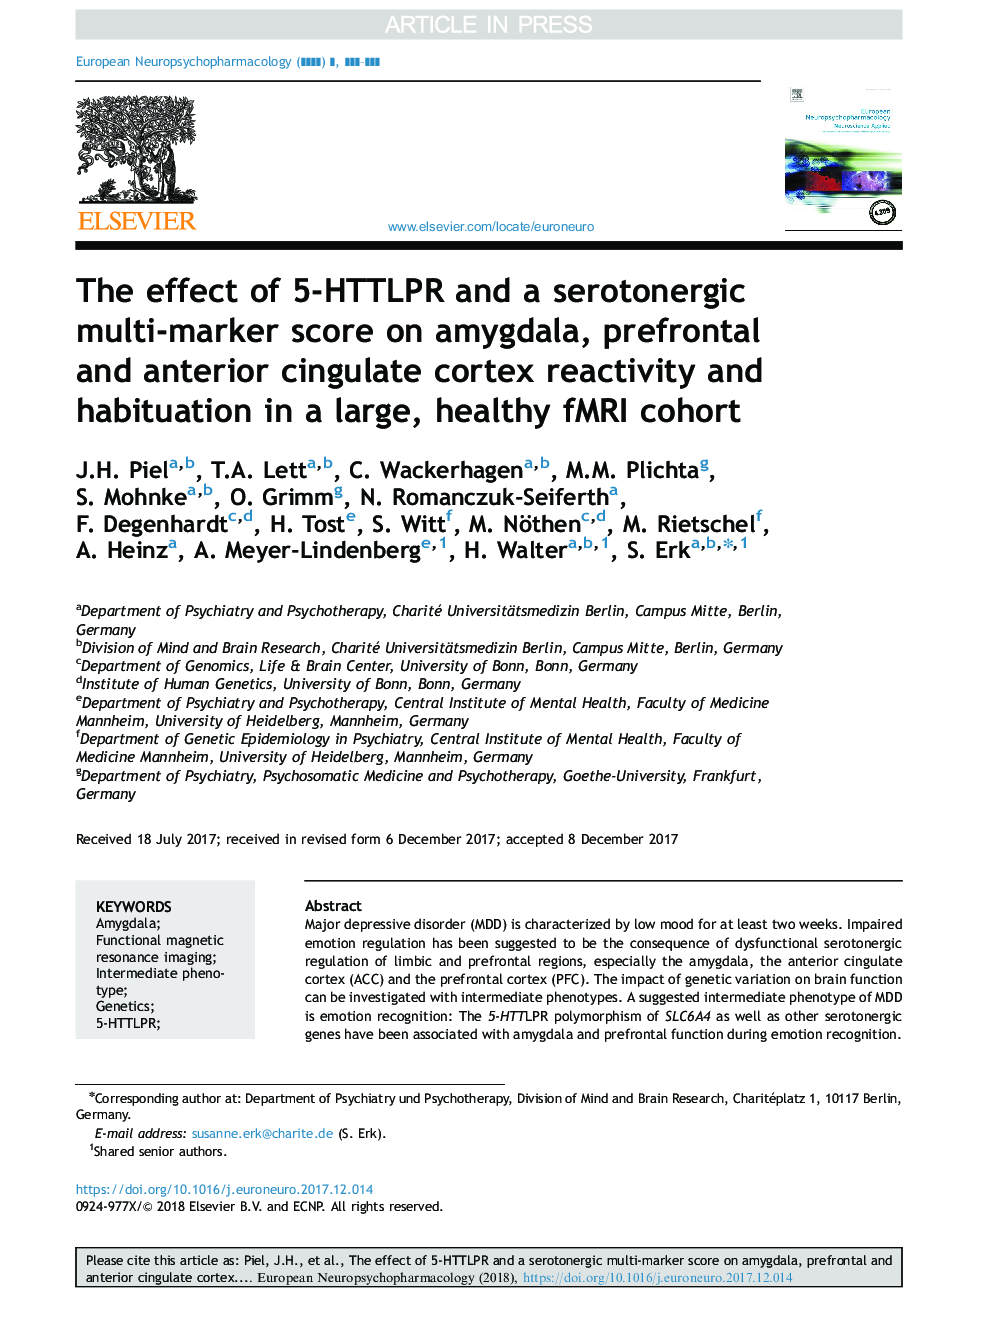 The effect of 5-HTTLPR and a serotonergic multi-marker score on amygdala, prefrontal and anterior cingulate cortex reactivity and habituation in a large, healthy fMRI cohort